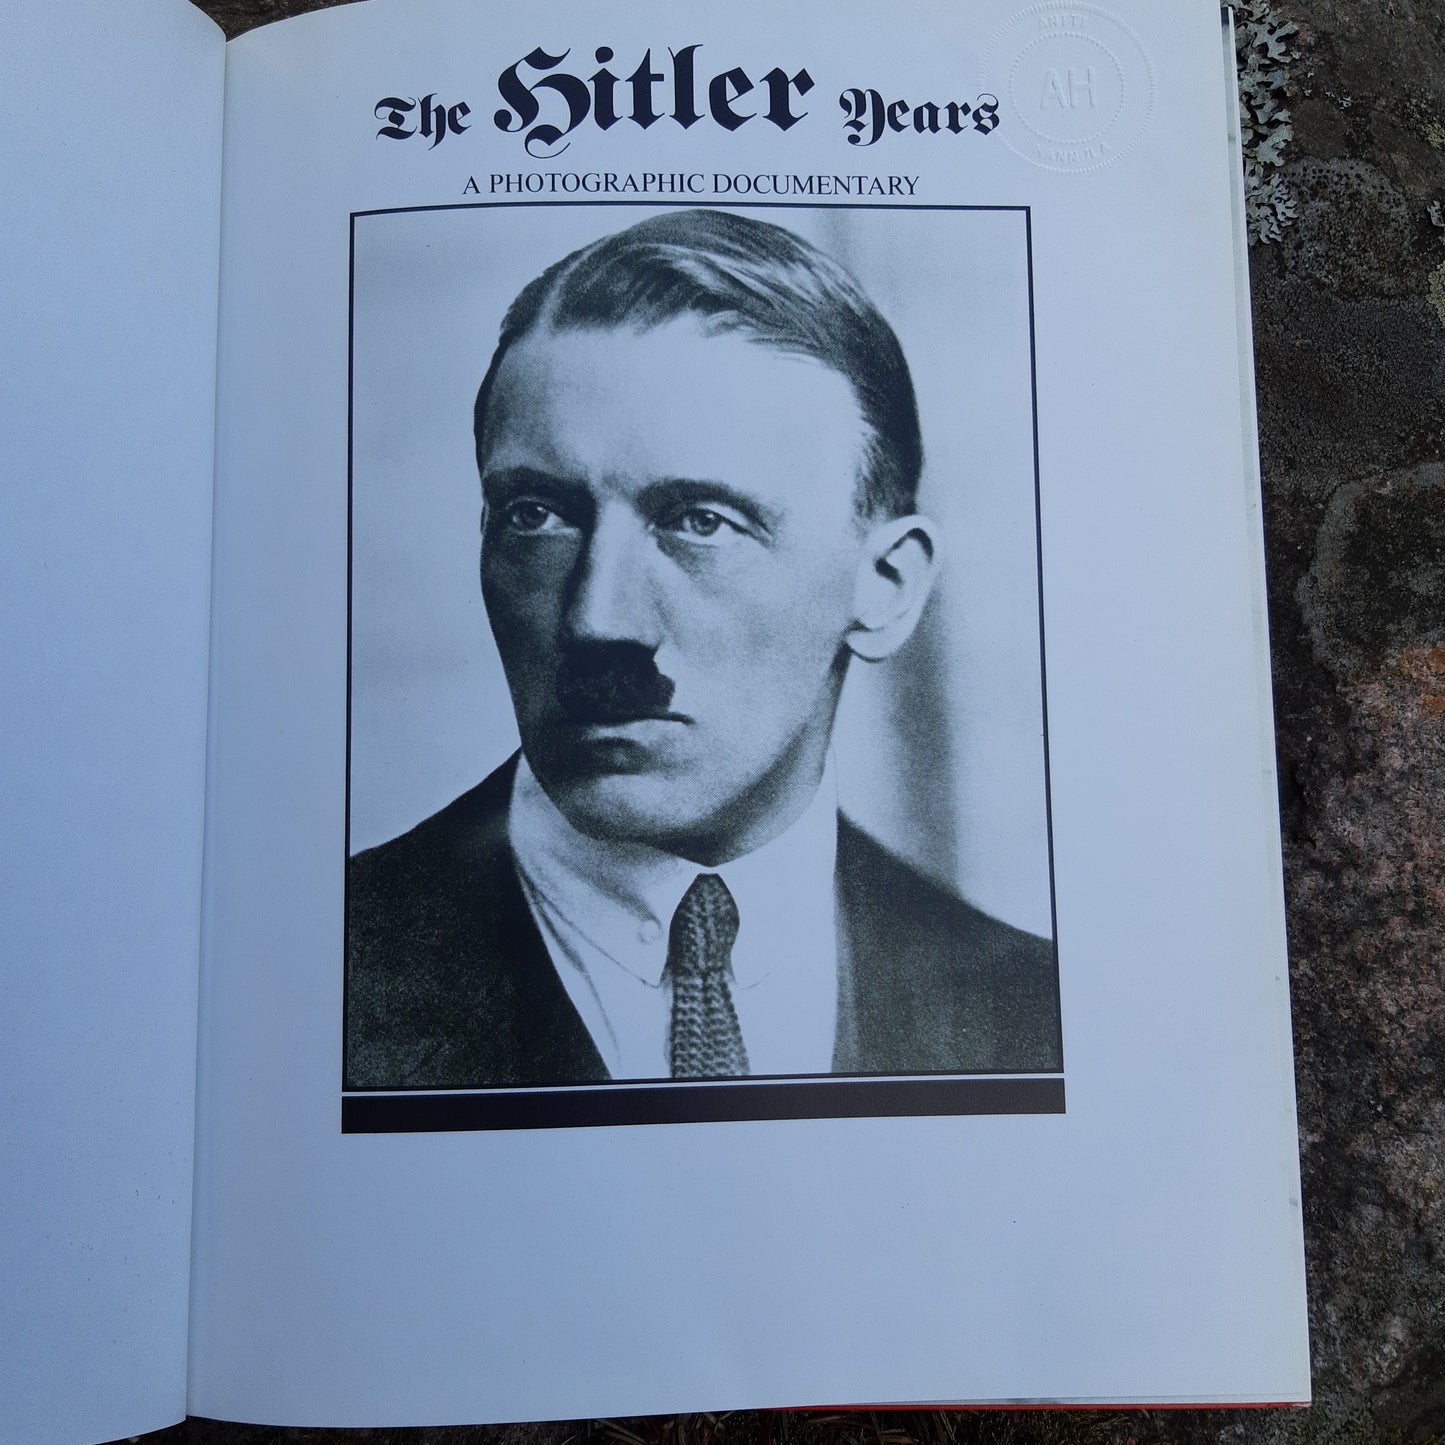 The Hitler Years - A Photographic Documentary